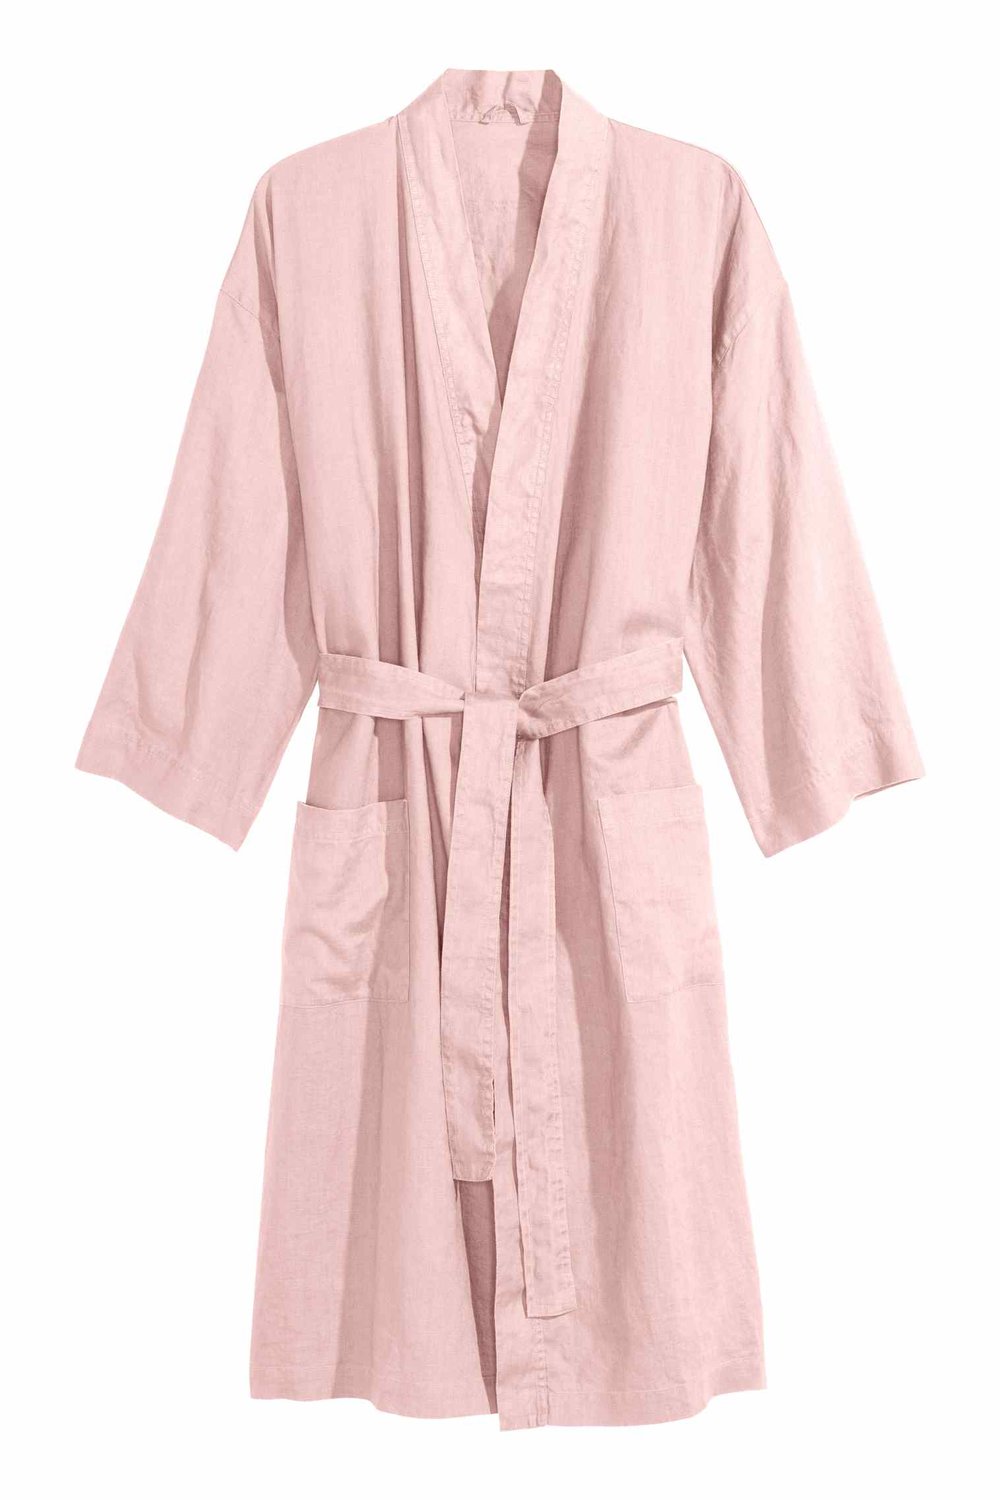 Washed linen dressing gown, $60